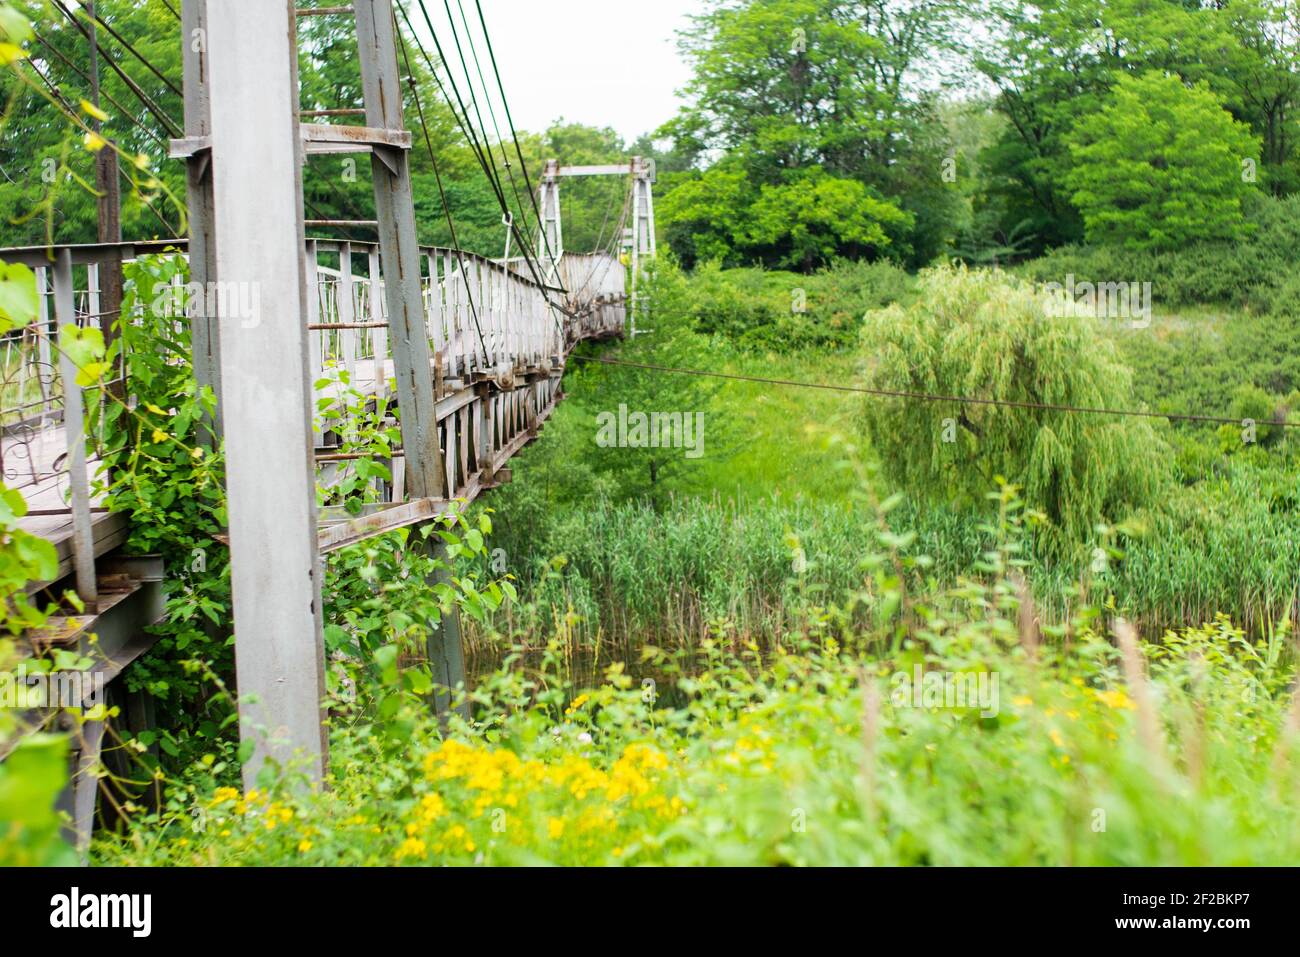 Old iron non-functioning suspension bridge over a dried river side view. Bright photo and juicy greens. A river overgrown. Stock Photo